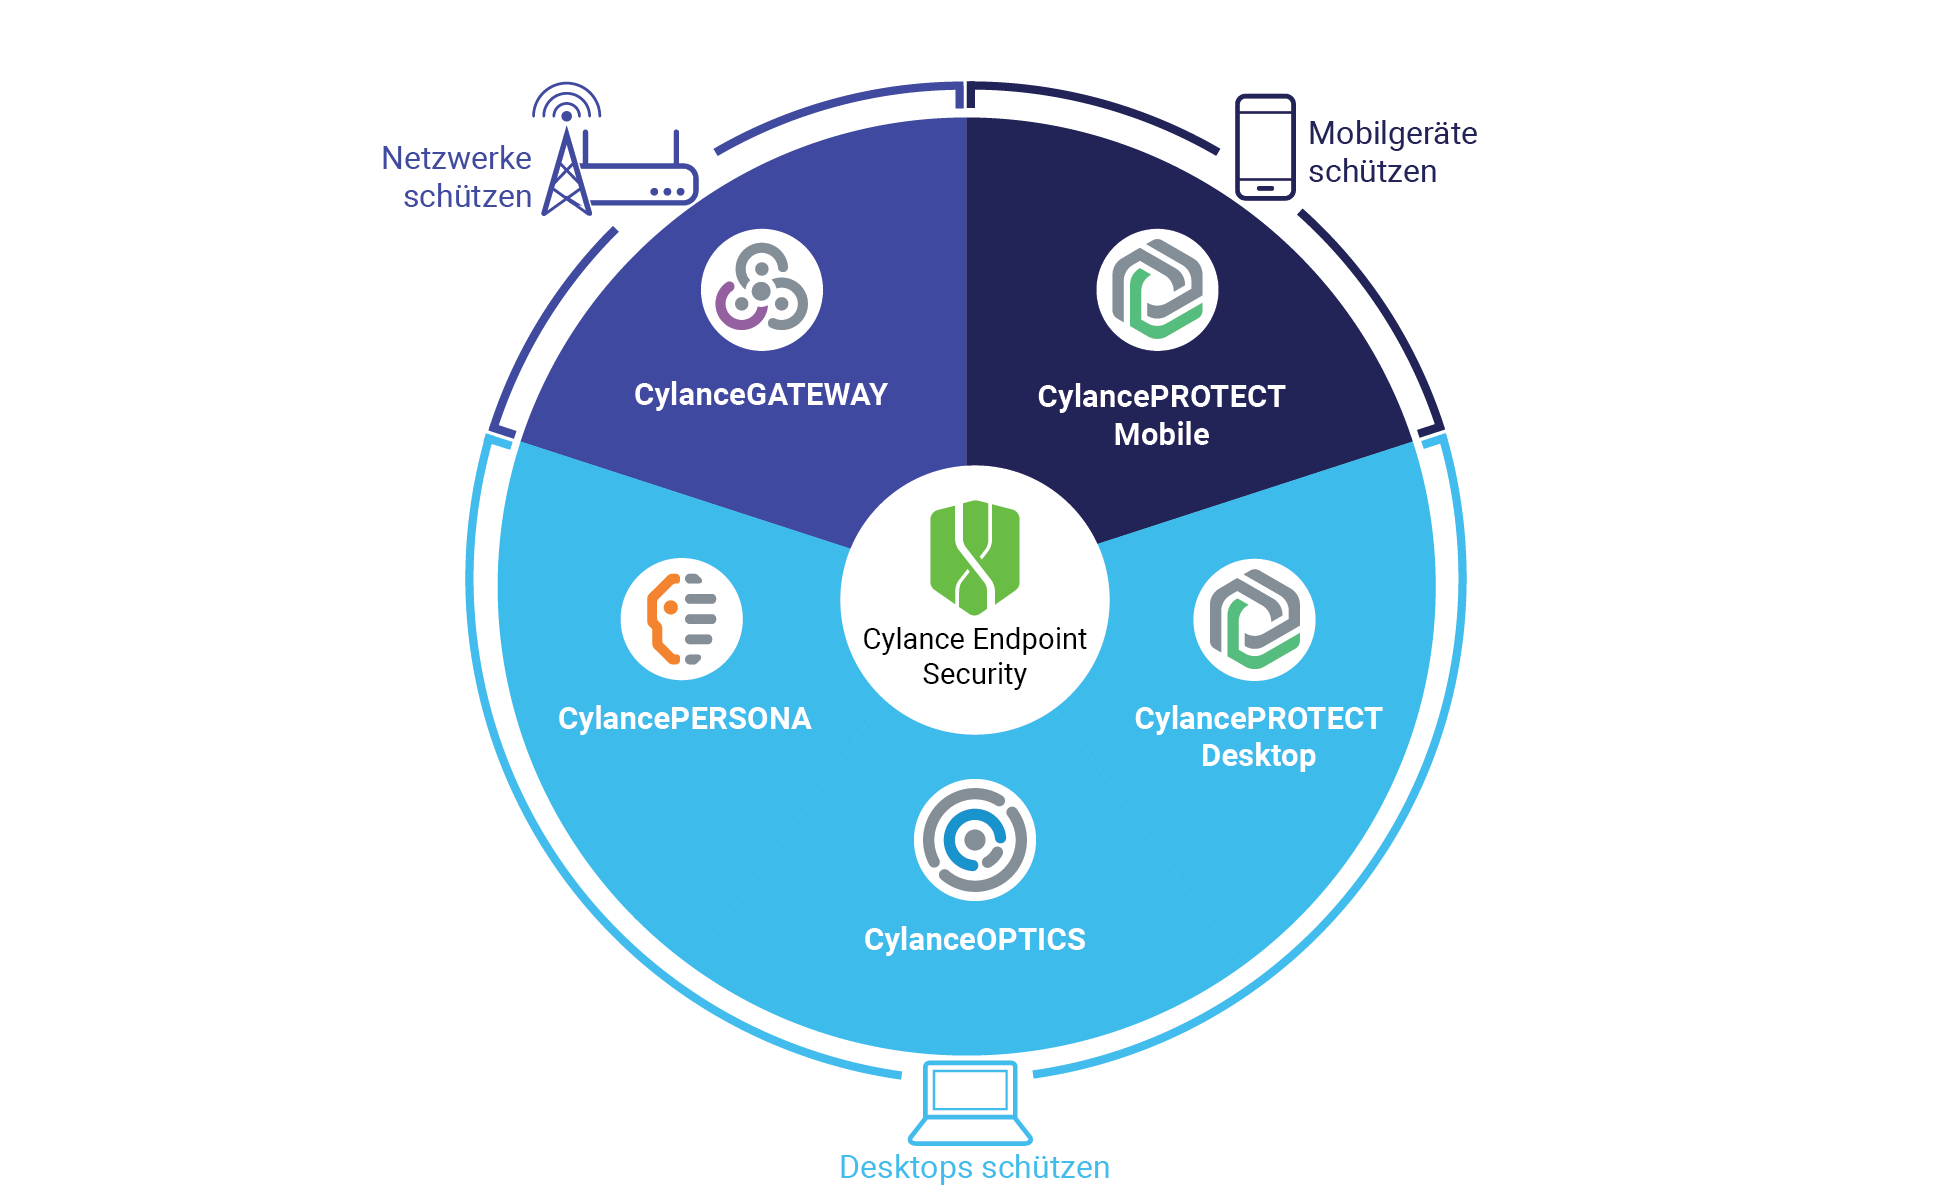 The pillars of the Cylance Endpoint Security platform excluding Avert 